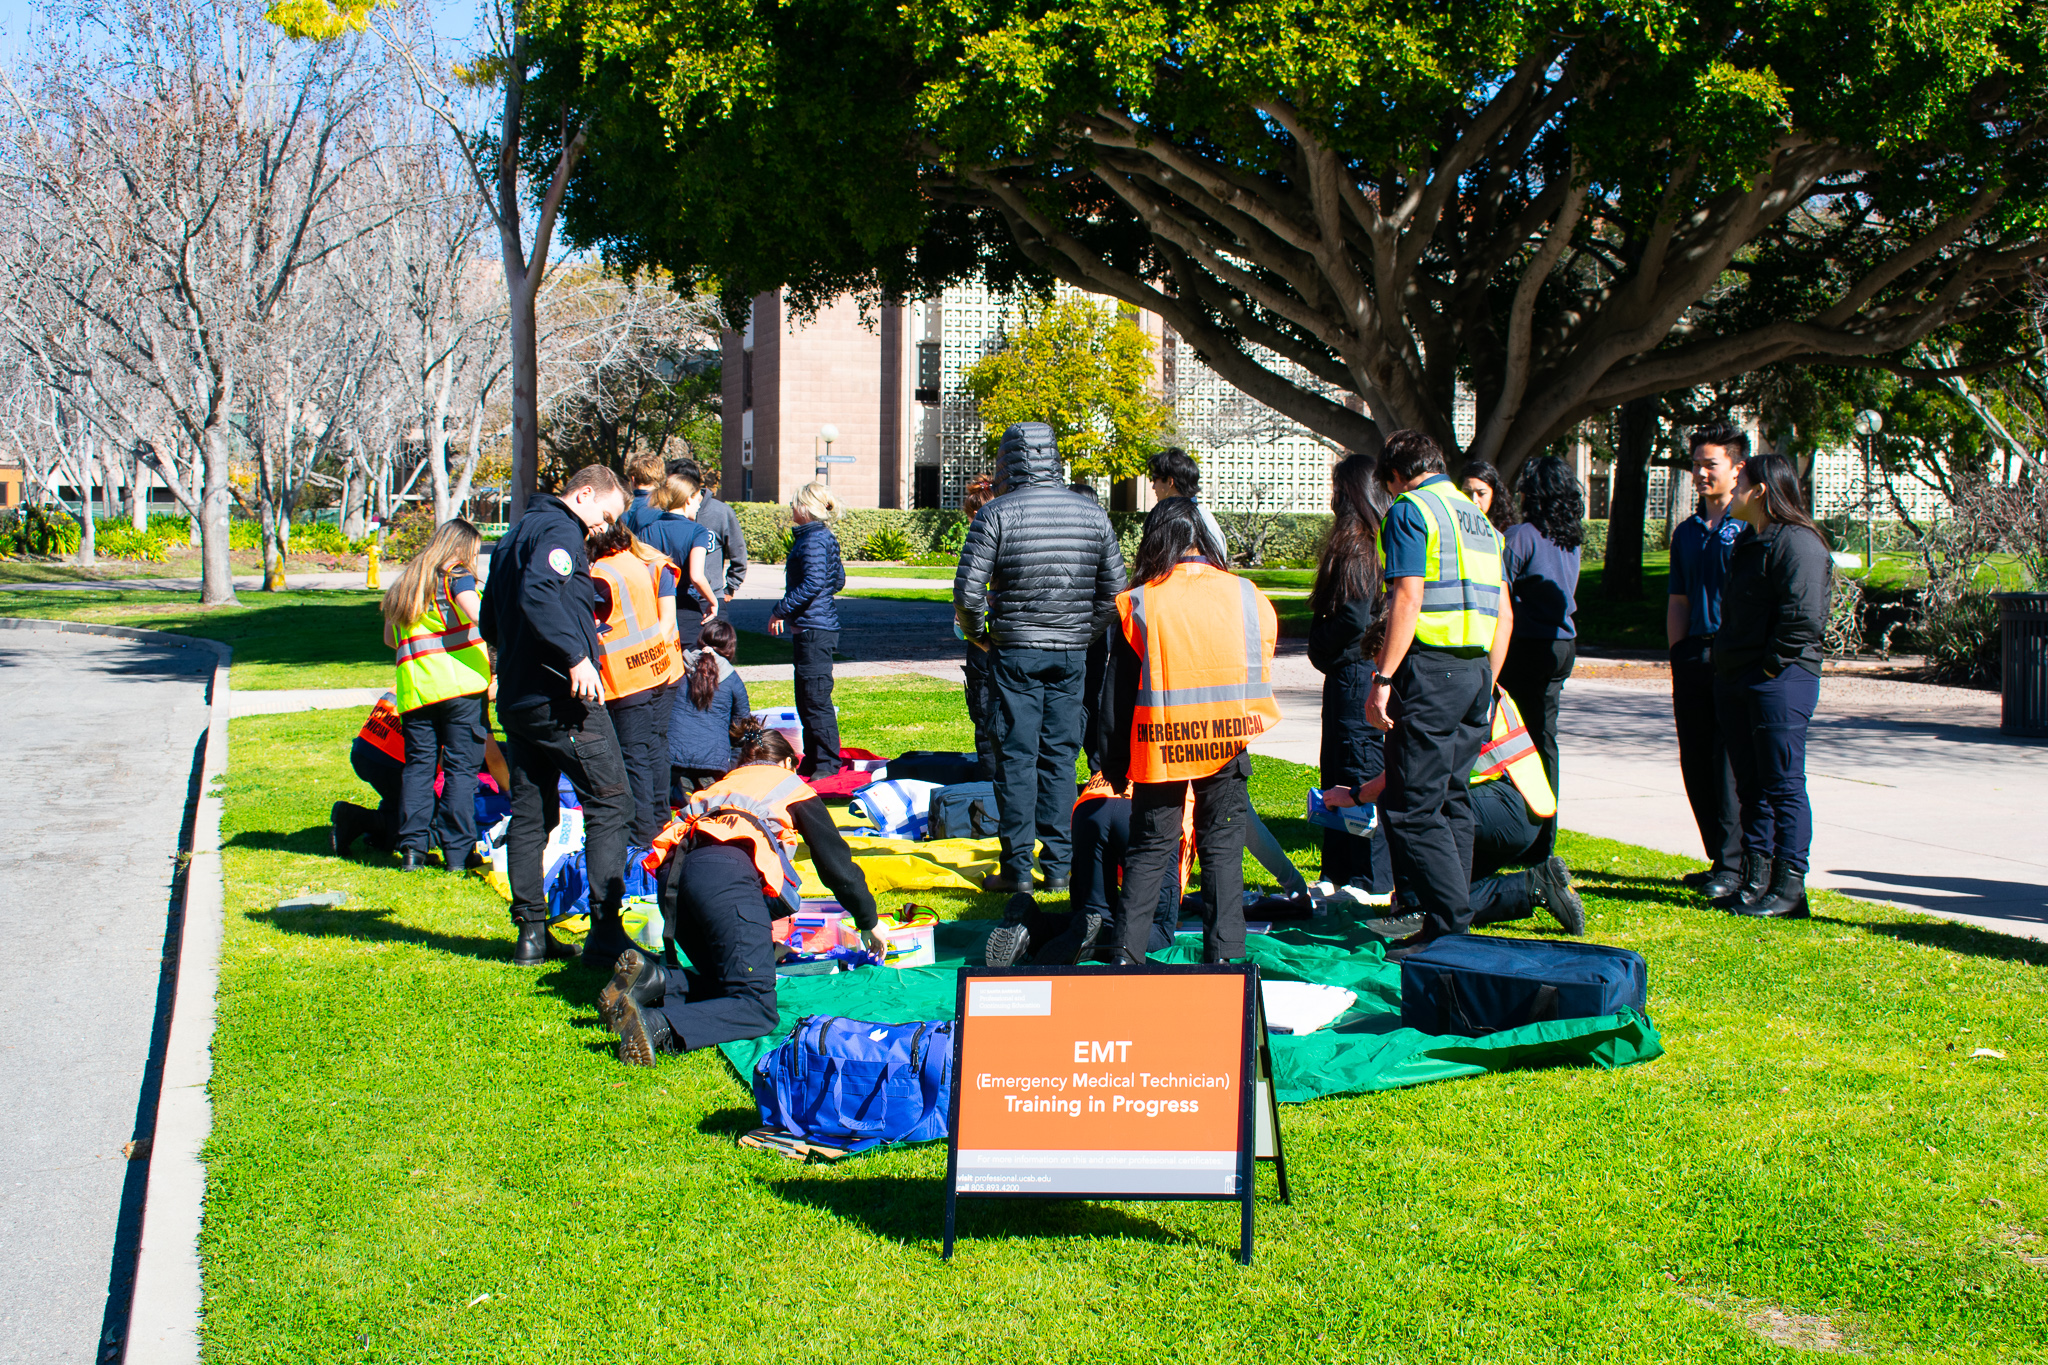 EMT Students kneeling down to work on a patient, in the foreground is an A-frame saying "EMT Training in Progress"